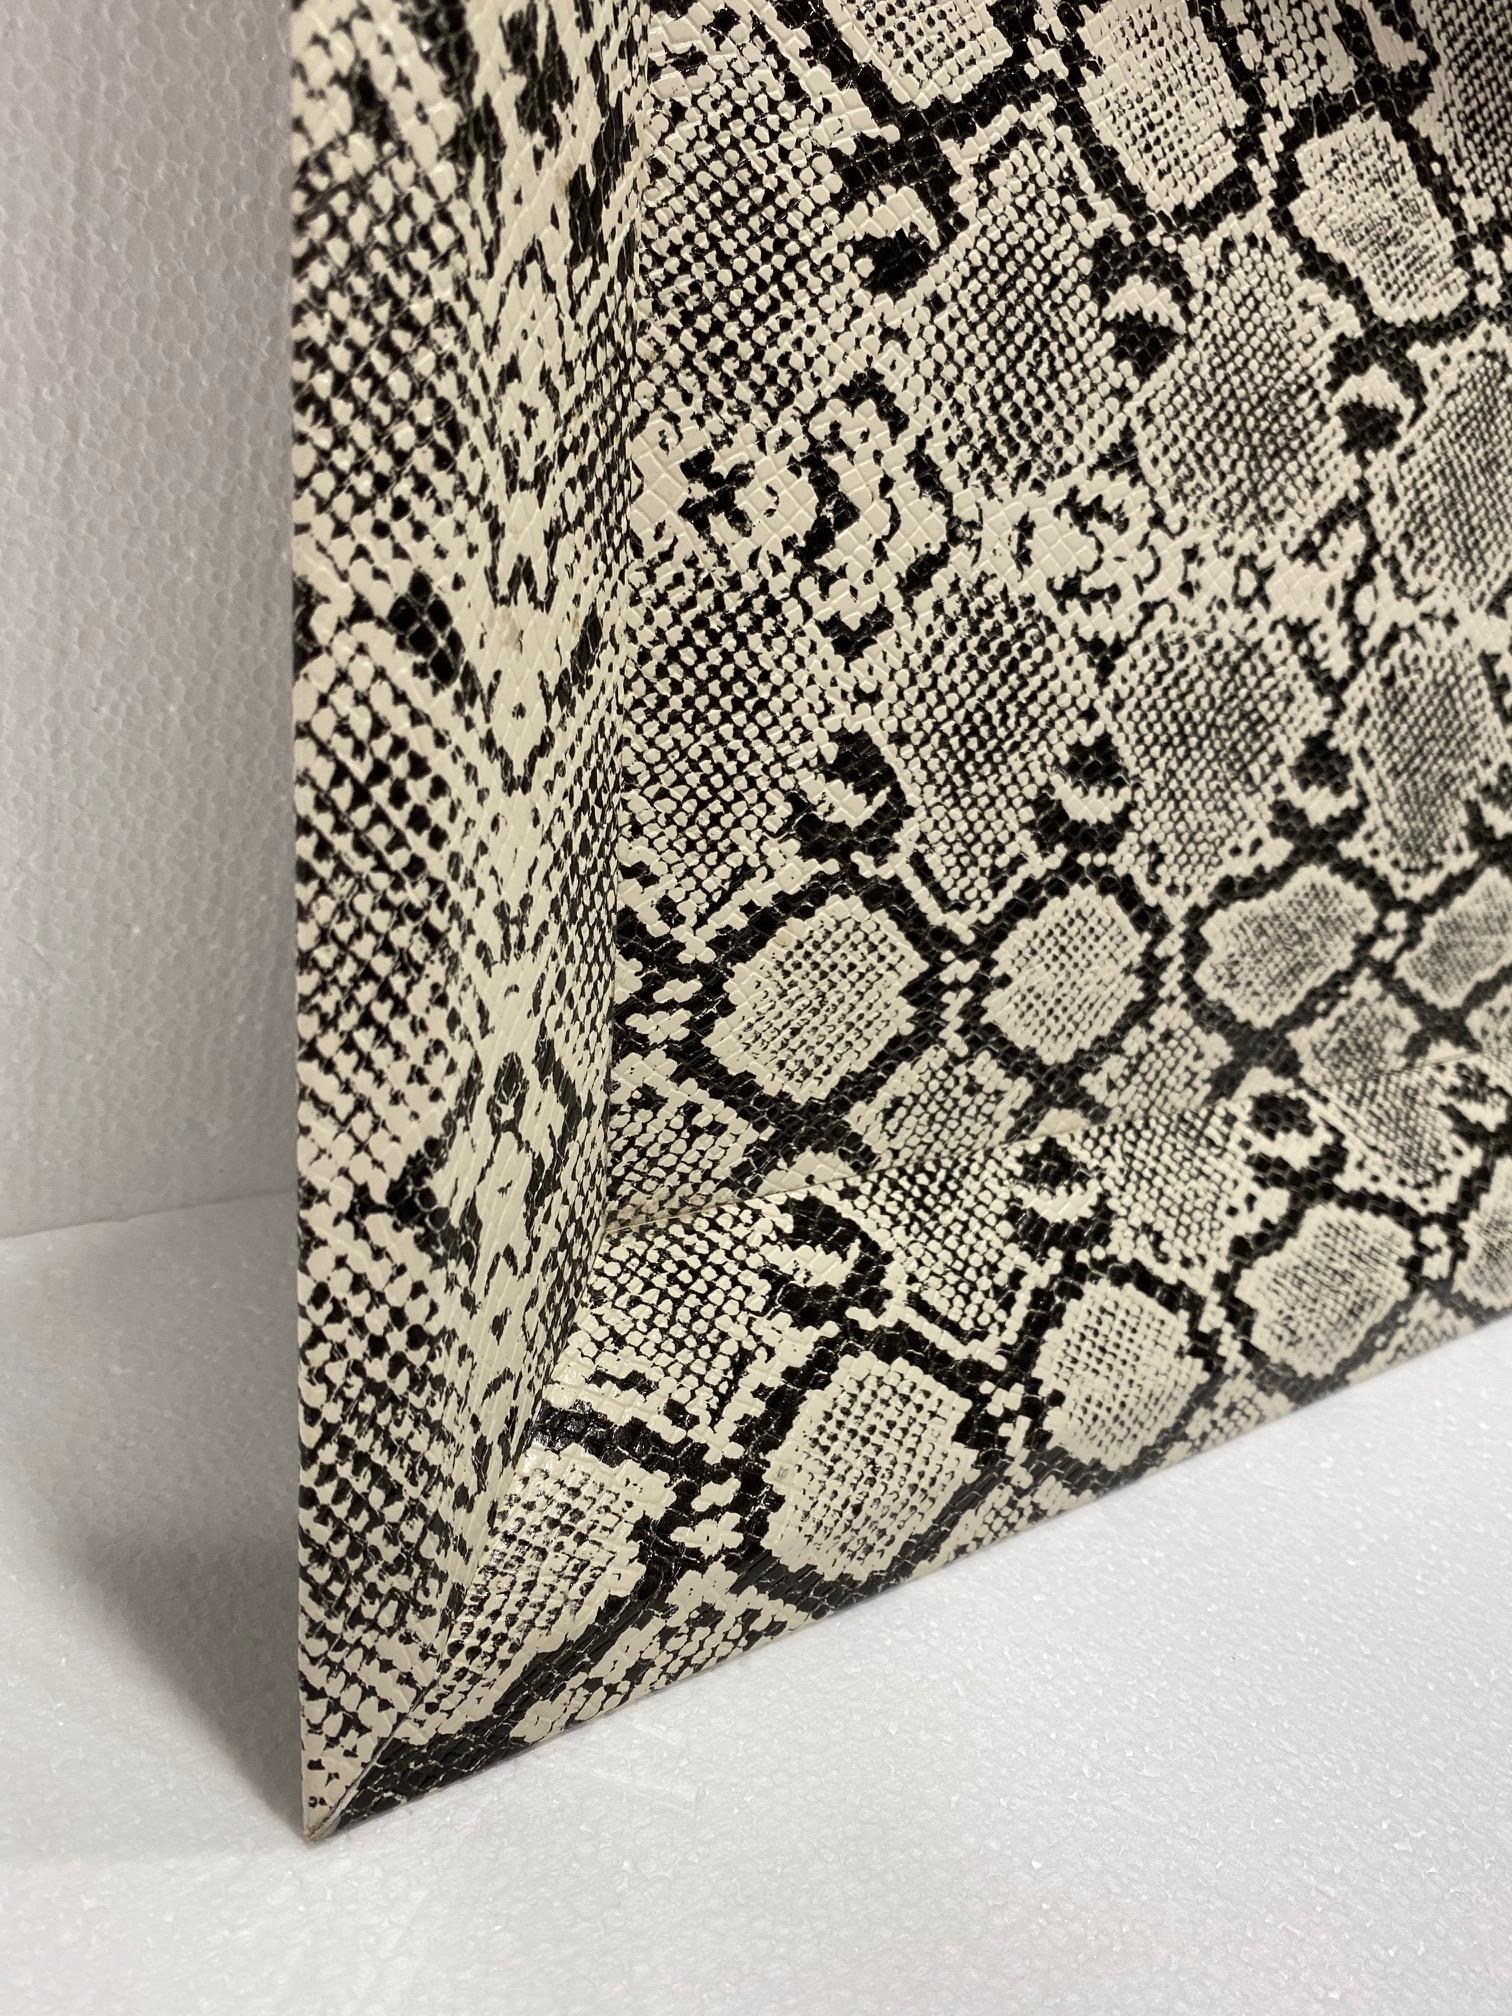 North American Vintage Organic Modern Faux Python Leather Tray in Ivory and Black, circa 2010